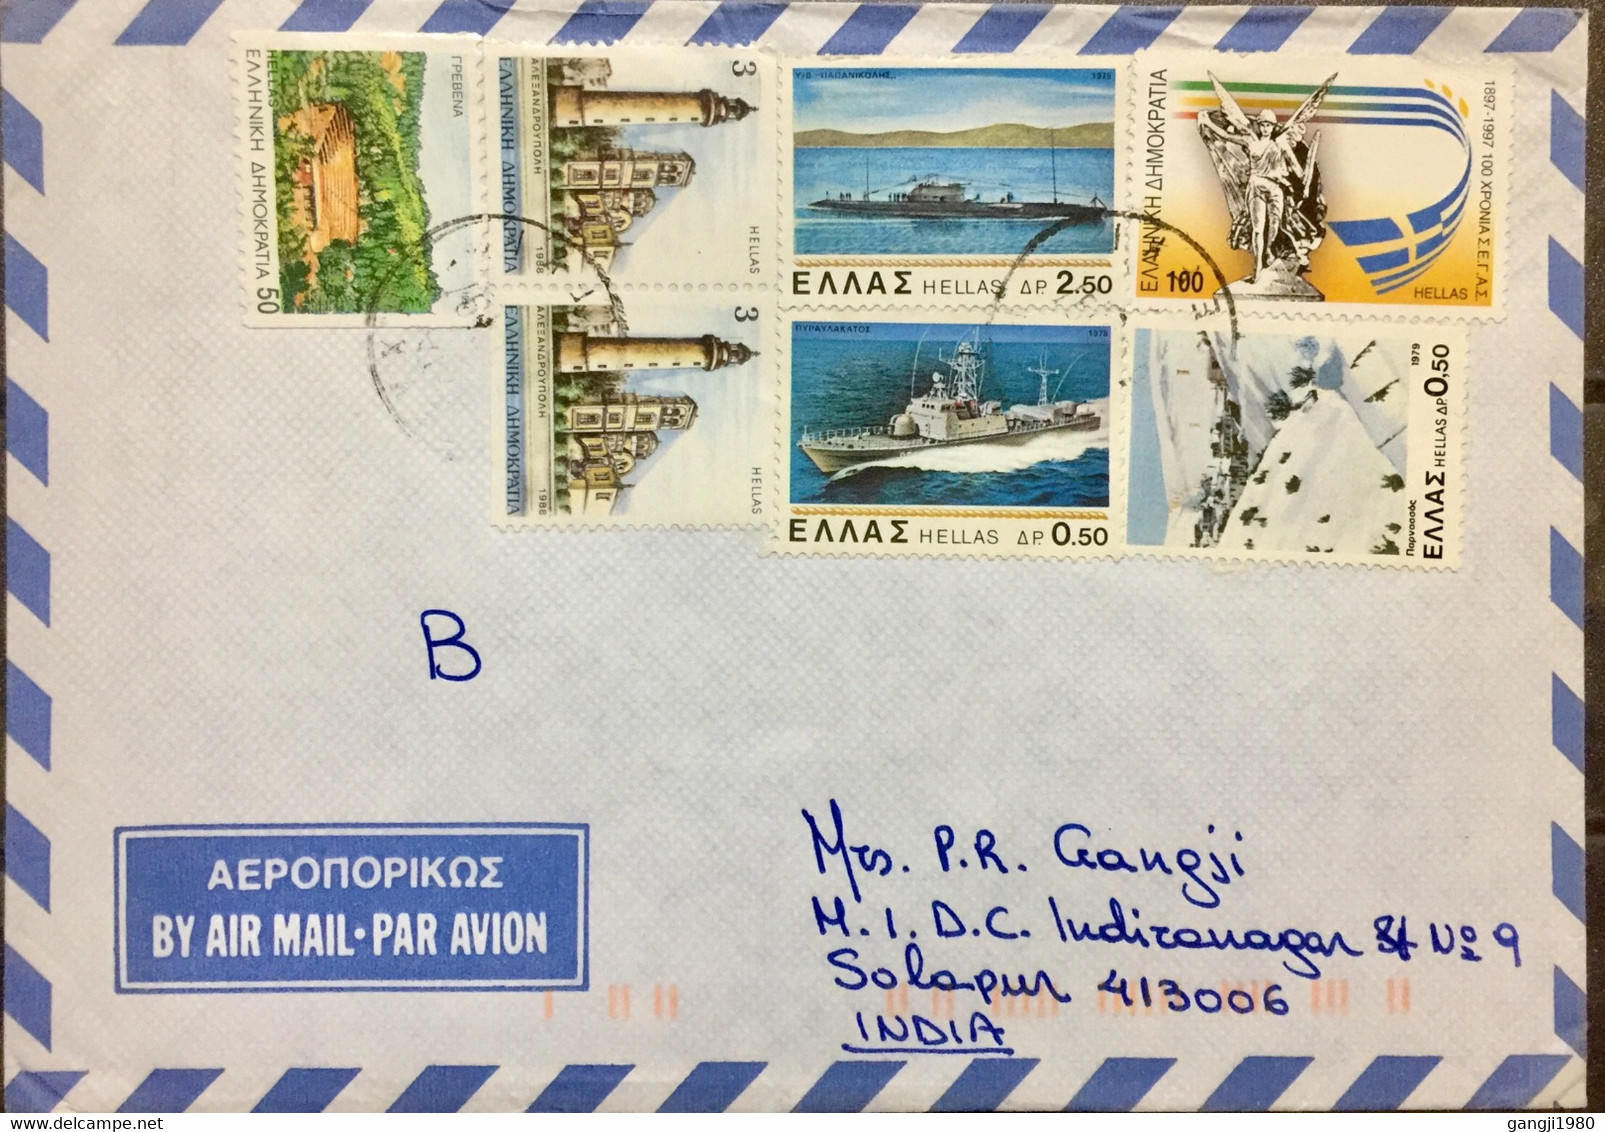 GREECE 1997, USED AIRMAIL COVER TO INDIA,DIFFERENT 7 STAMPS SHIP ,LIGHT HOUSE,FLAG,NATURE,SNOW -MOUNTAIN STATUE, BUILDIN - 1941-45 Occupazione Giapponese